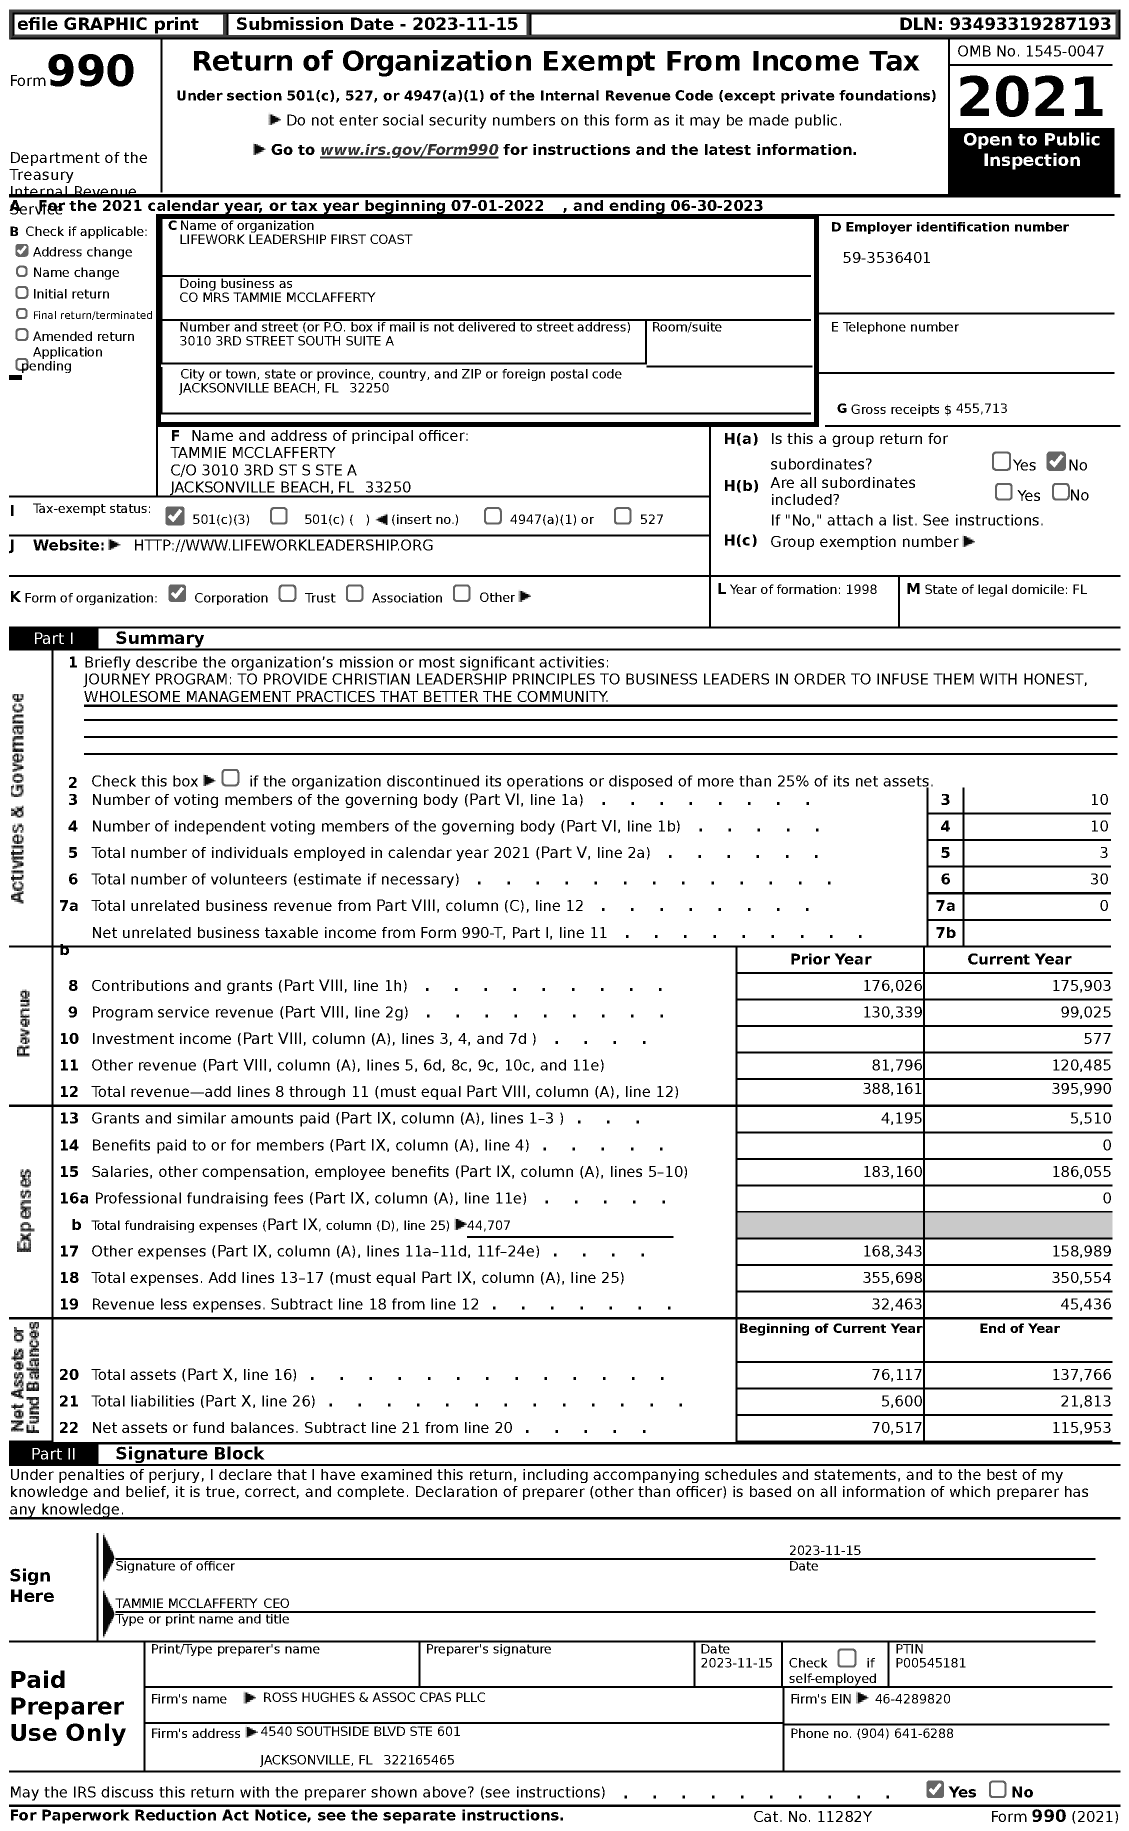 Image of first page of 2022 Form 990 for Lifework Leadership Jacksonville